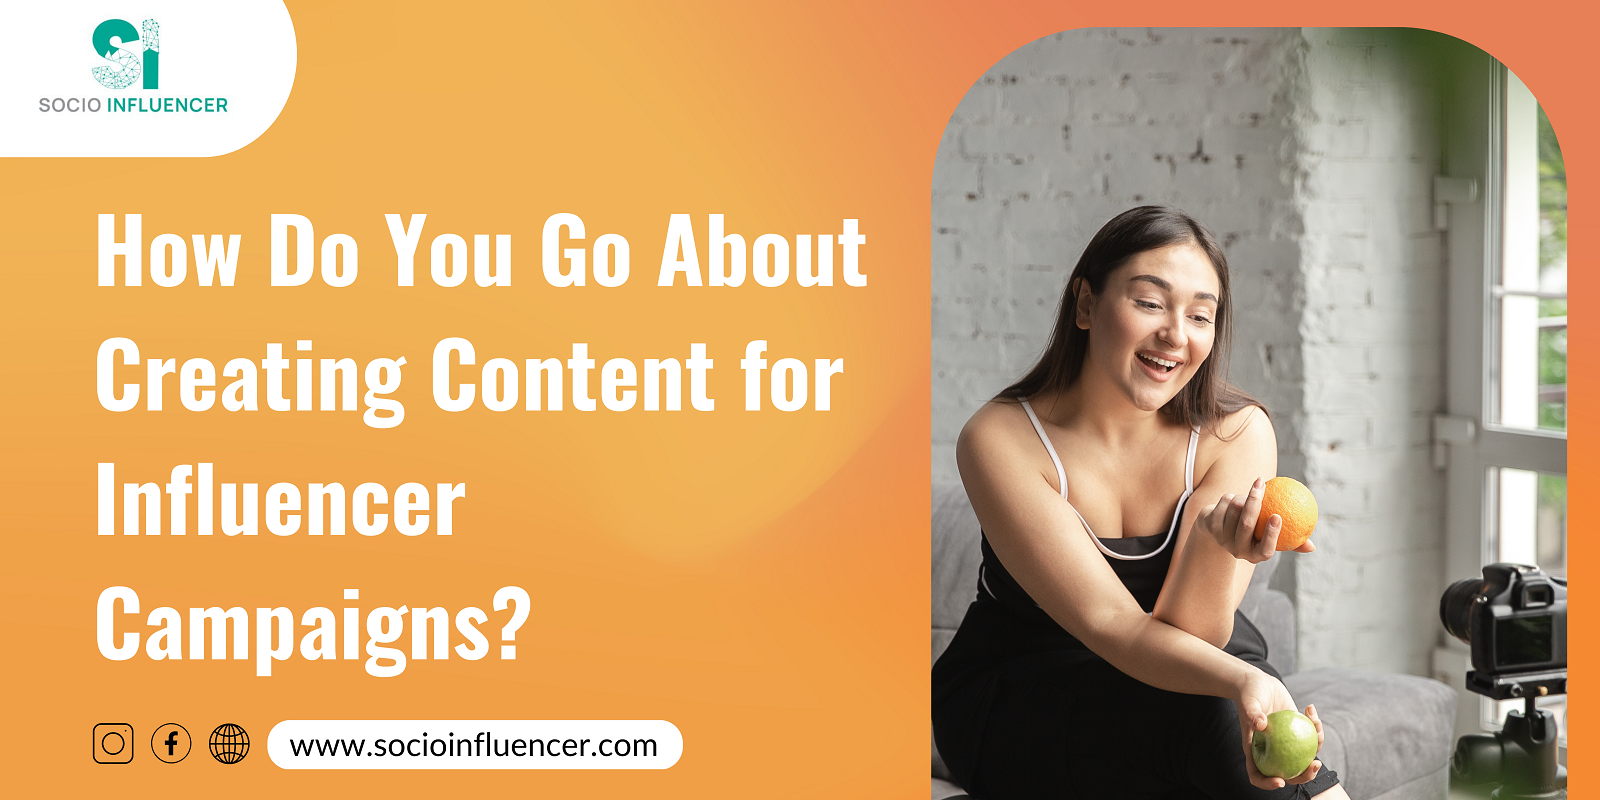 Content Creation for Influencer Campaigns: How Do You Do It?